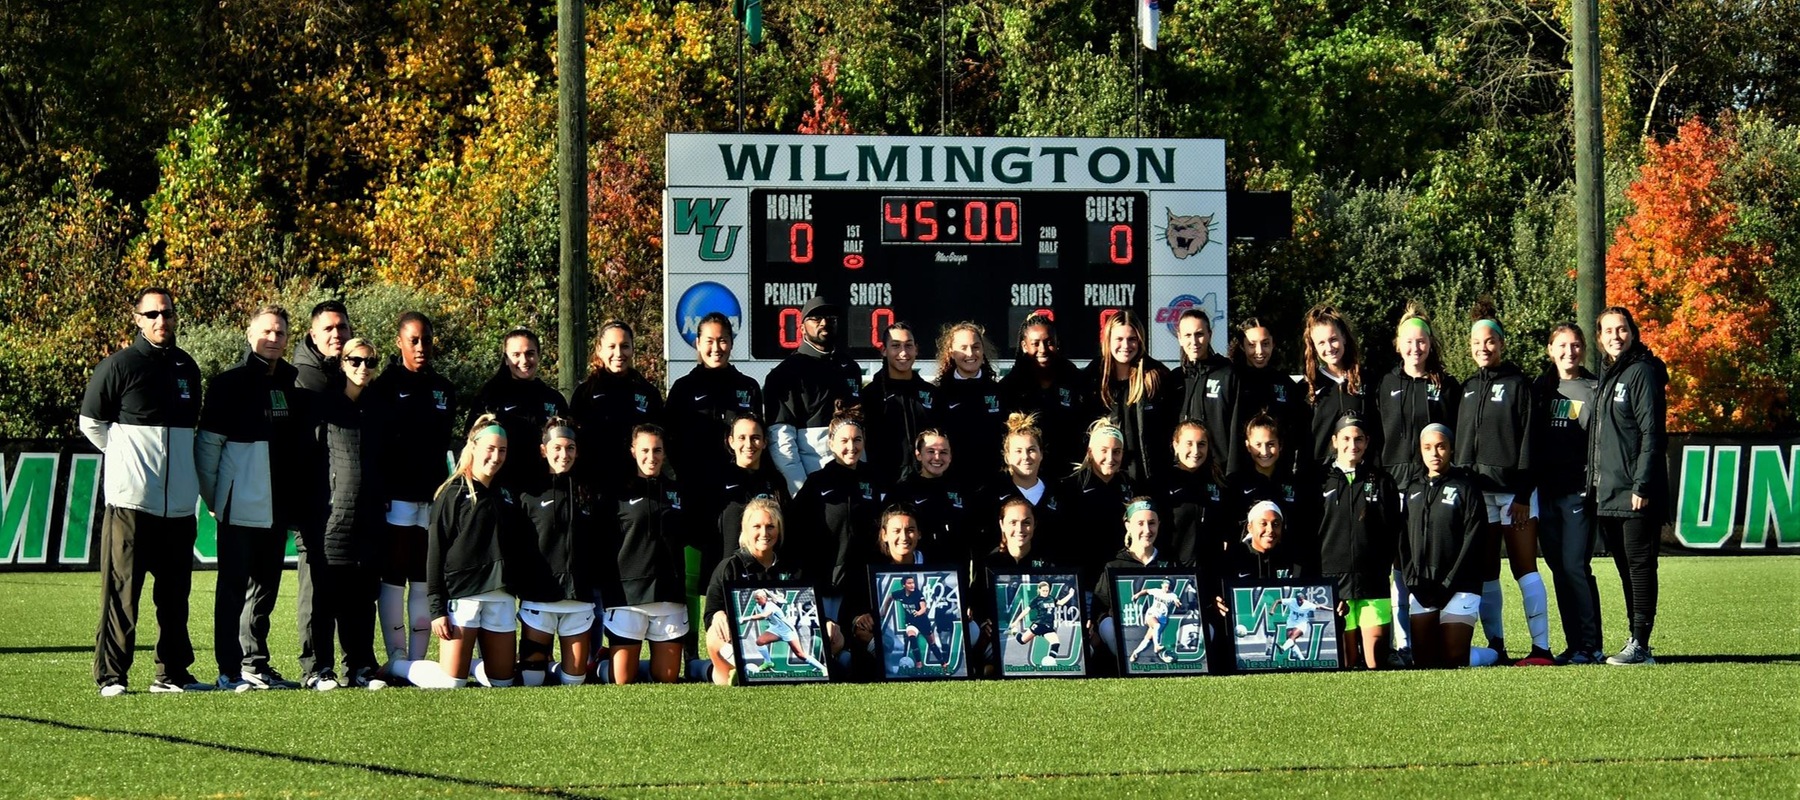 Copyright 2021; Wilmington University. All rights reserved. Photo by James Jones.